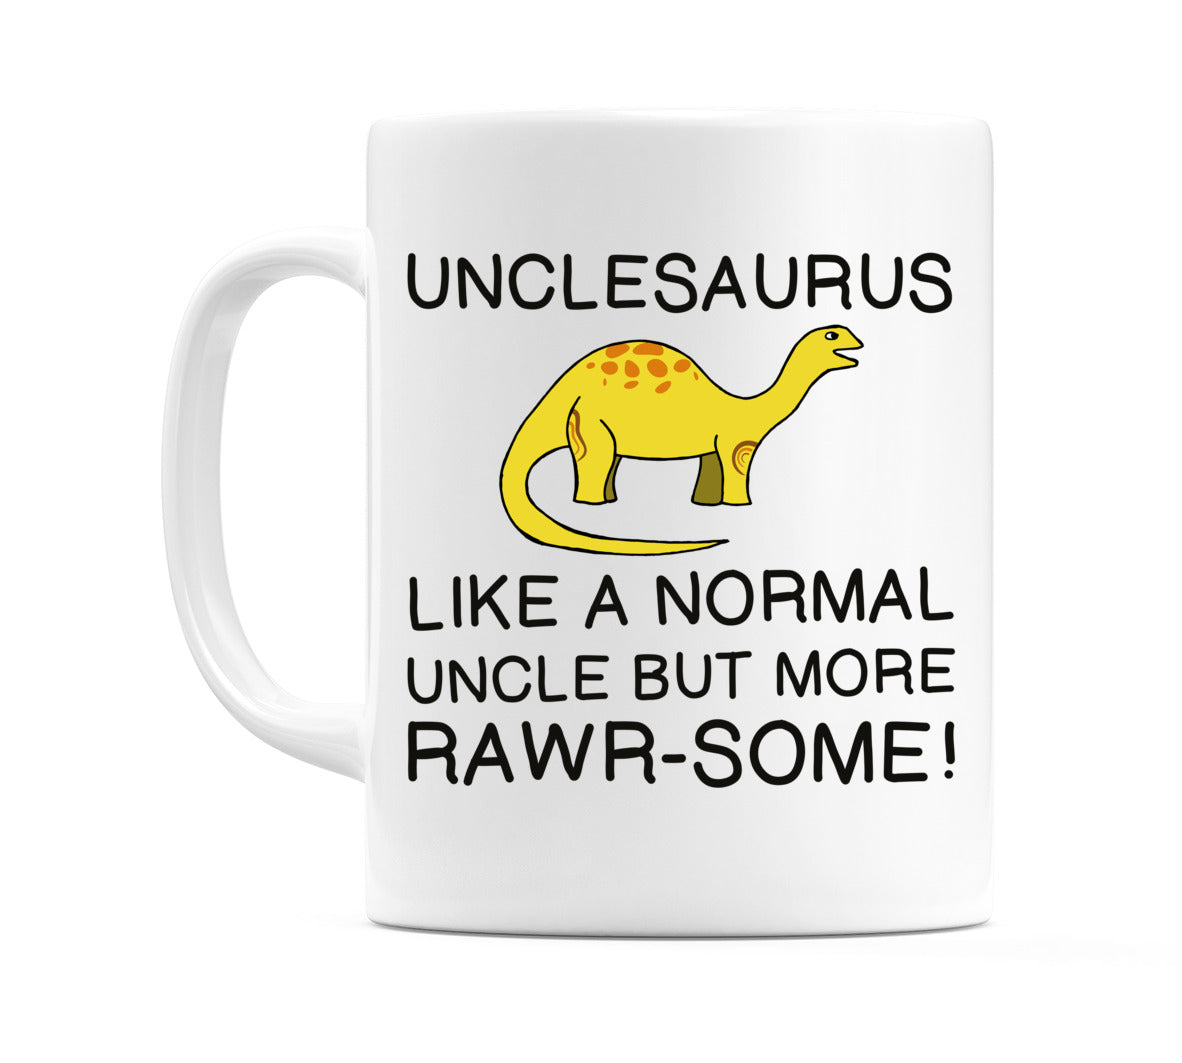 Unclesaurus - Like a normal uncle but more RAWR-SOME! Mug